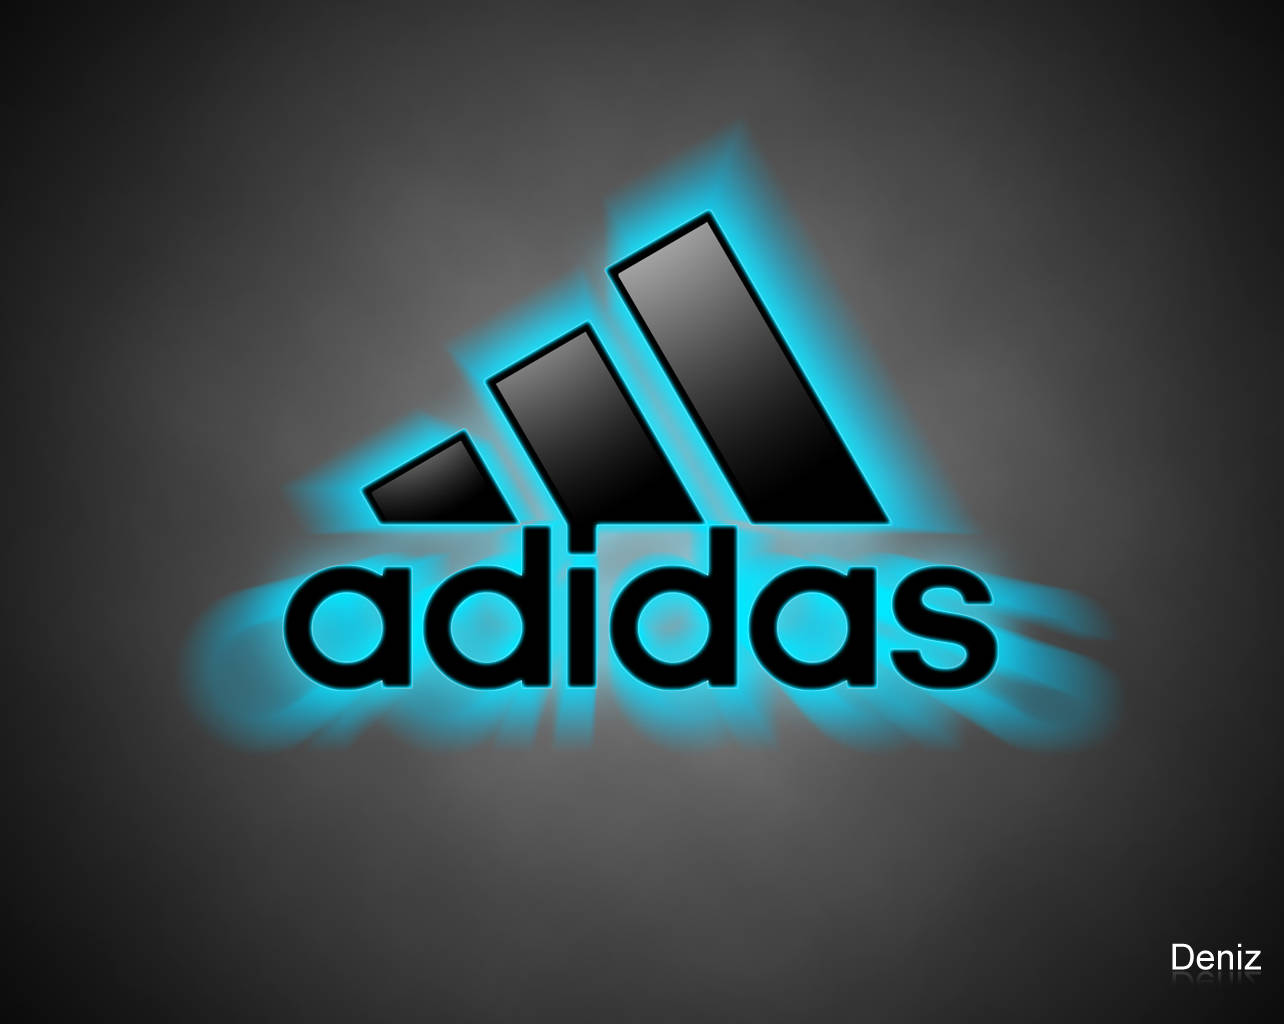 Step into your next adventure with the iconic Adidas logo. Wallpaper